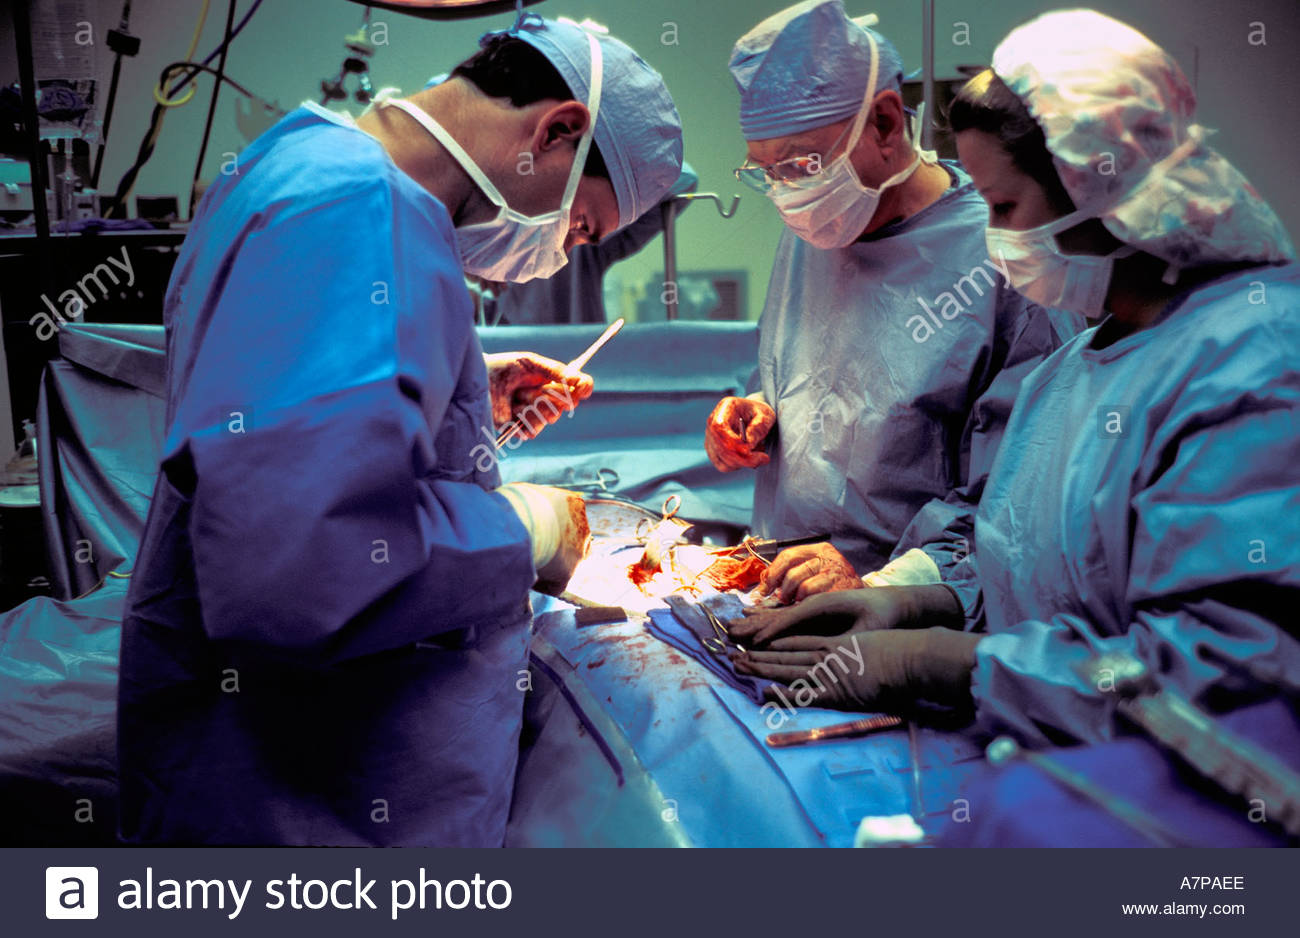 surgical team performs kidney transplant in operating room A7PAEE